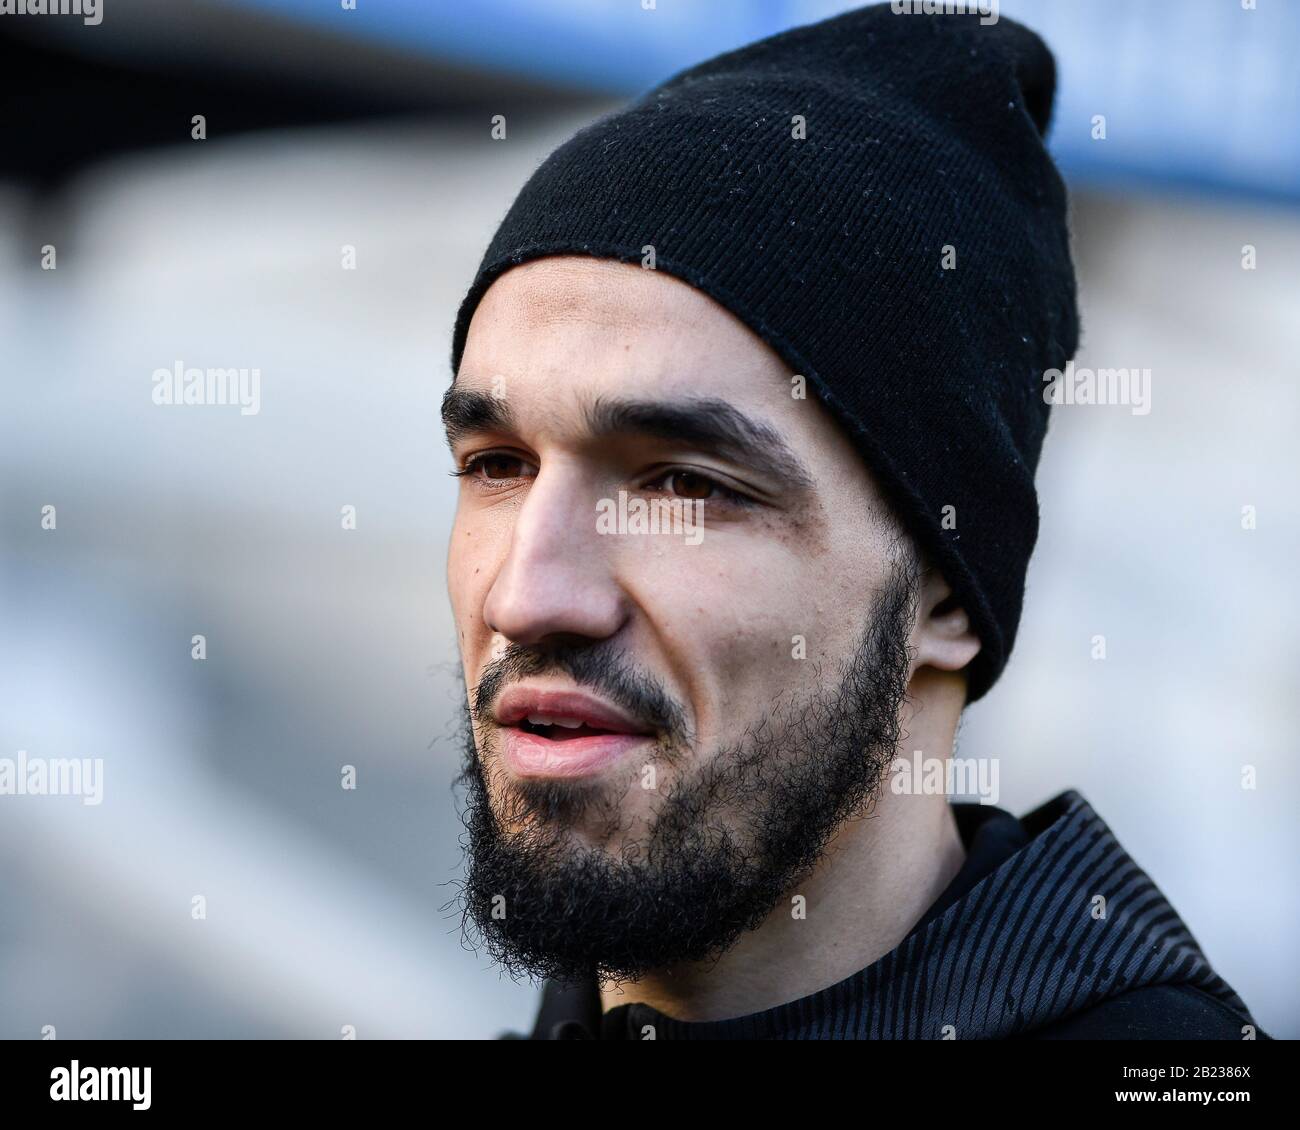 NEWCASTLE UPON TYNE, ENGLAND - FEBRUARY 29TH Nabil Bentaleb (42) of Newcastle United before the Premier League match between Newcastle United and Burnley at St. James's Park, Newcastle on Saturday 29th February 2020. (Credit: Iam Burn | MI News) Photograph may only be used for newspaper and/or magazine editorial purposes, license required for commercial use Credit: MI News & Sport /Alamy Live News Stock Photo